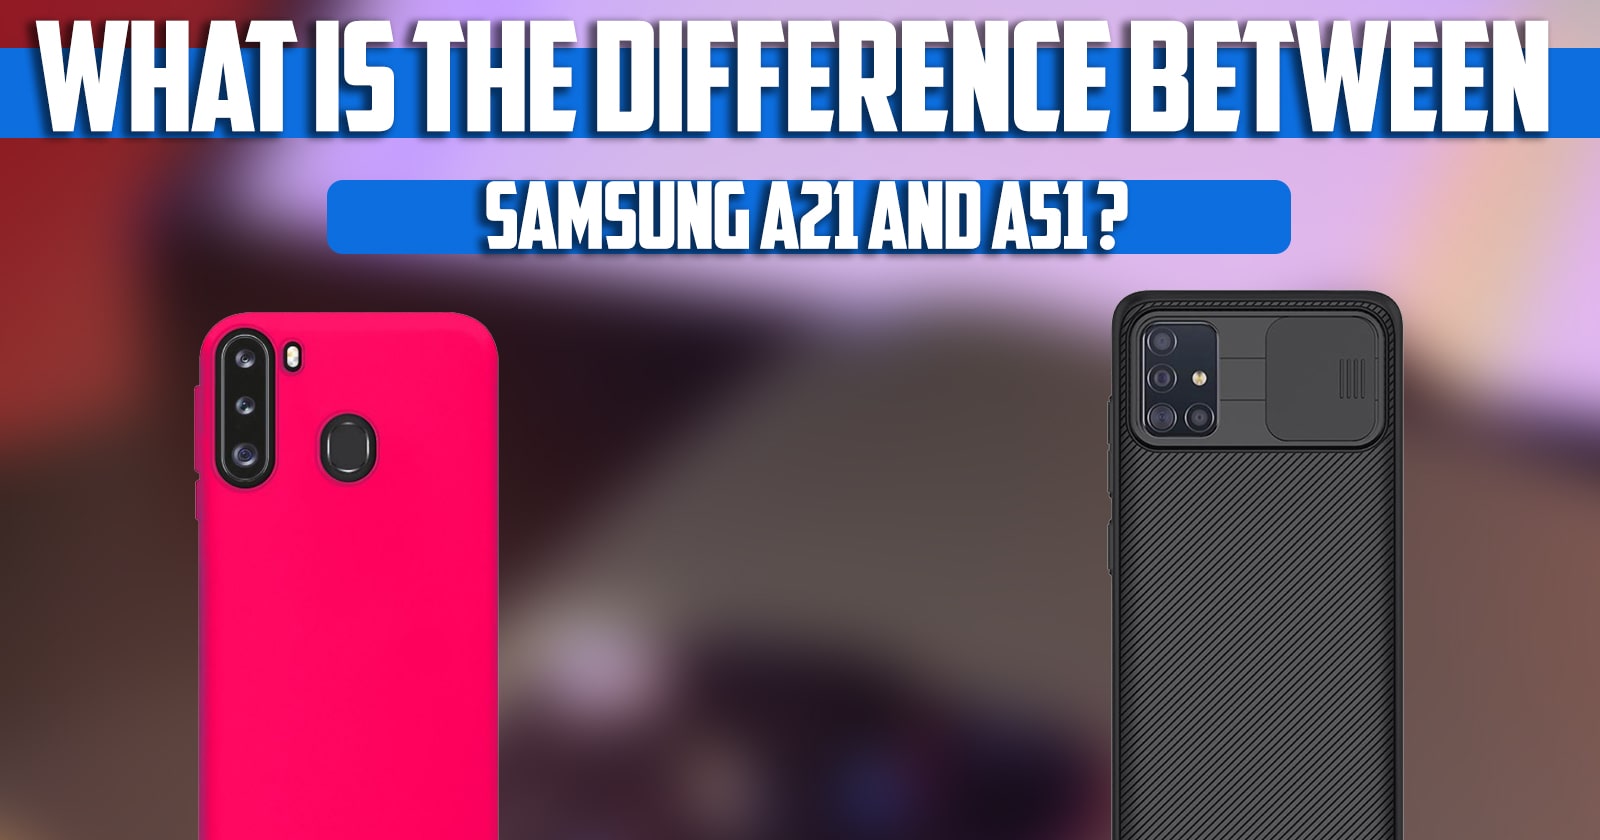 What is the difference between Samsung a21 and a51?